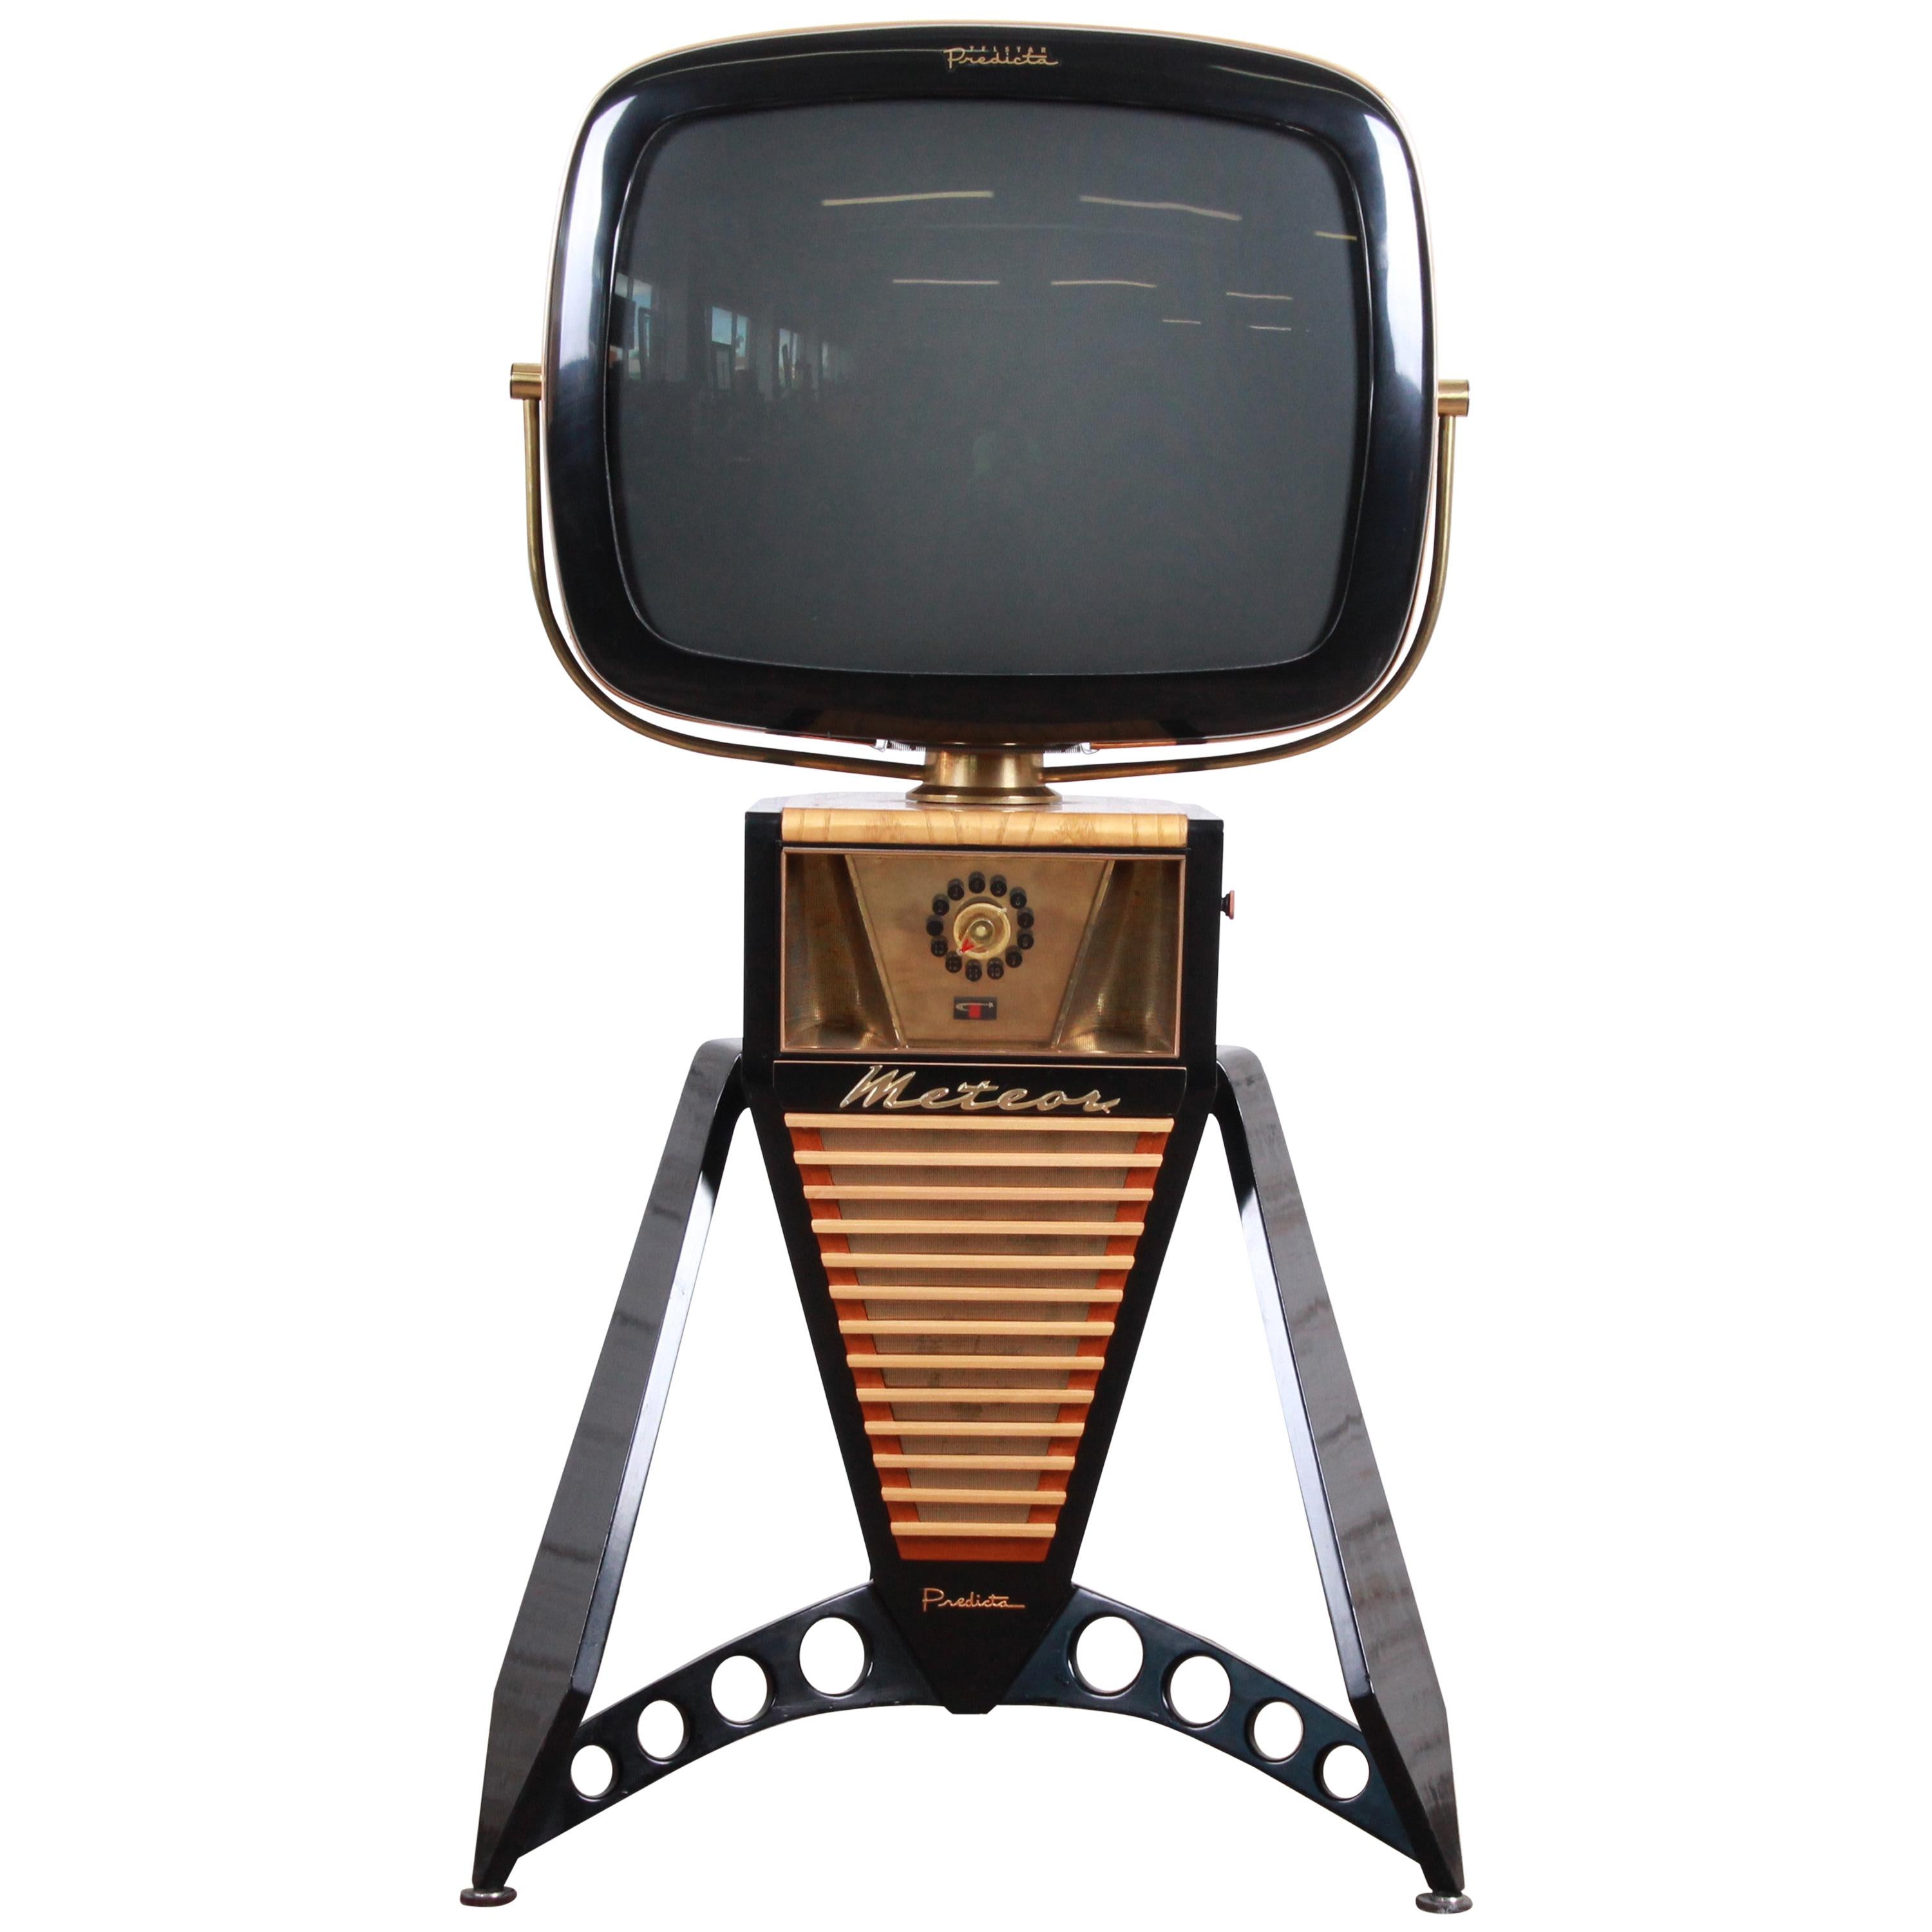 Predicta Meteor Mid-Century Modern Space Age Television by Telstar